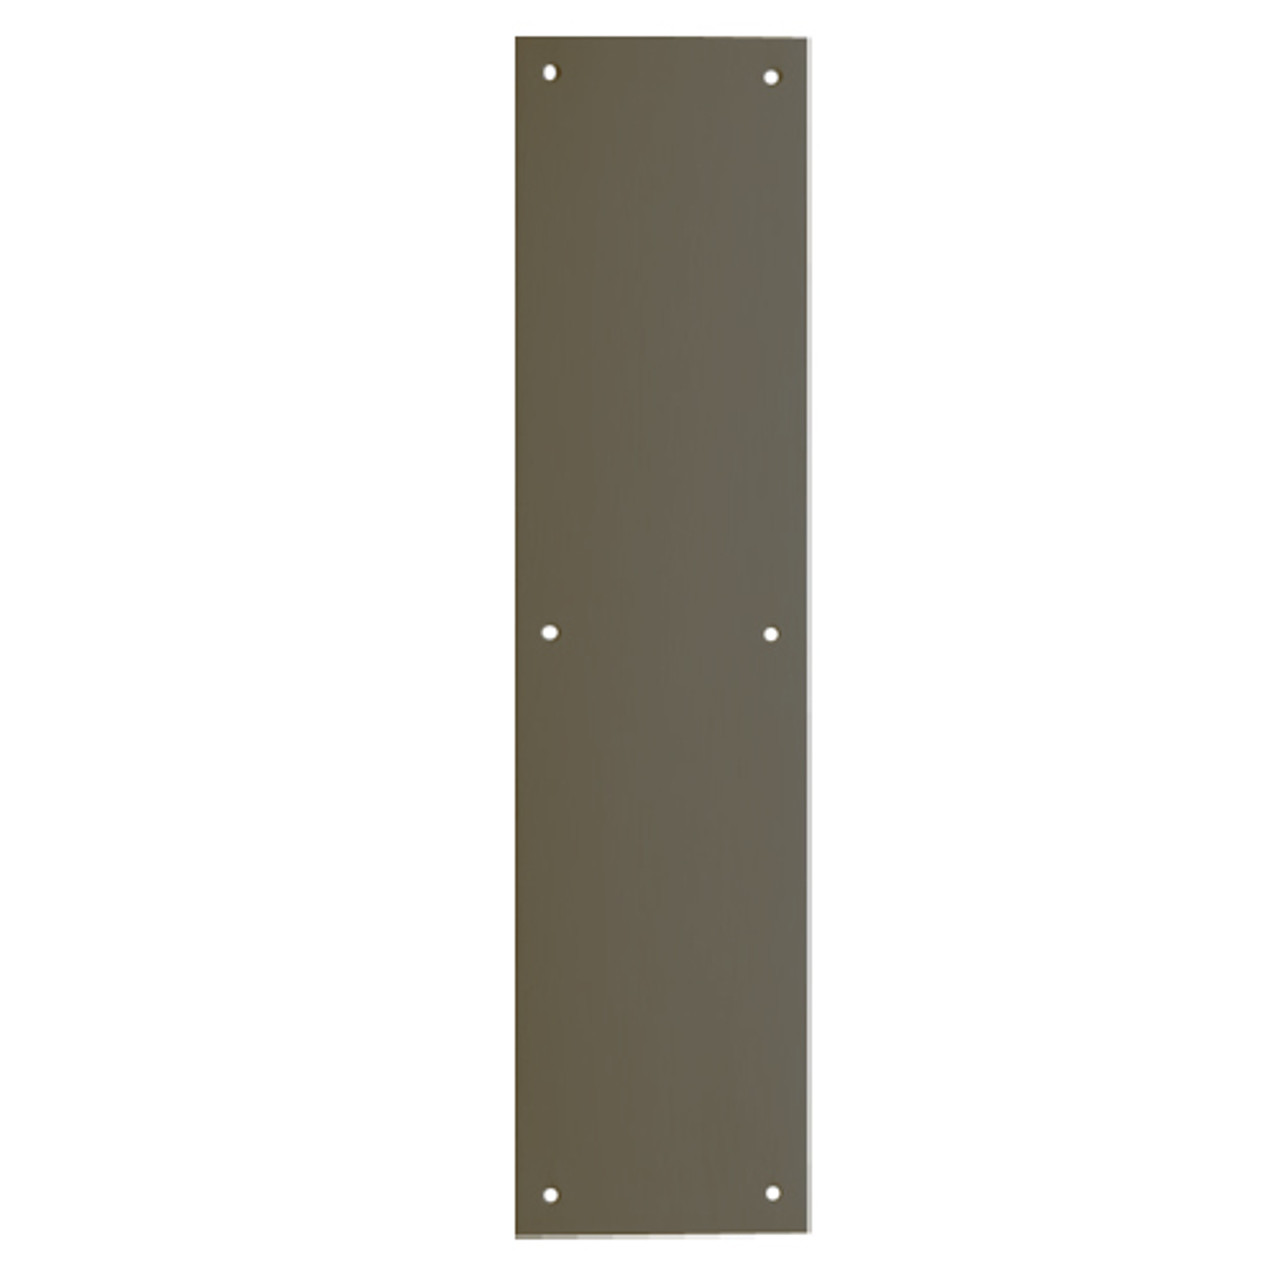 8200-US10B-6x16 IVES Architectural Door Trim 6x16 Inch Push Plate in Oil Rubbed Bronze